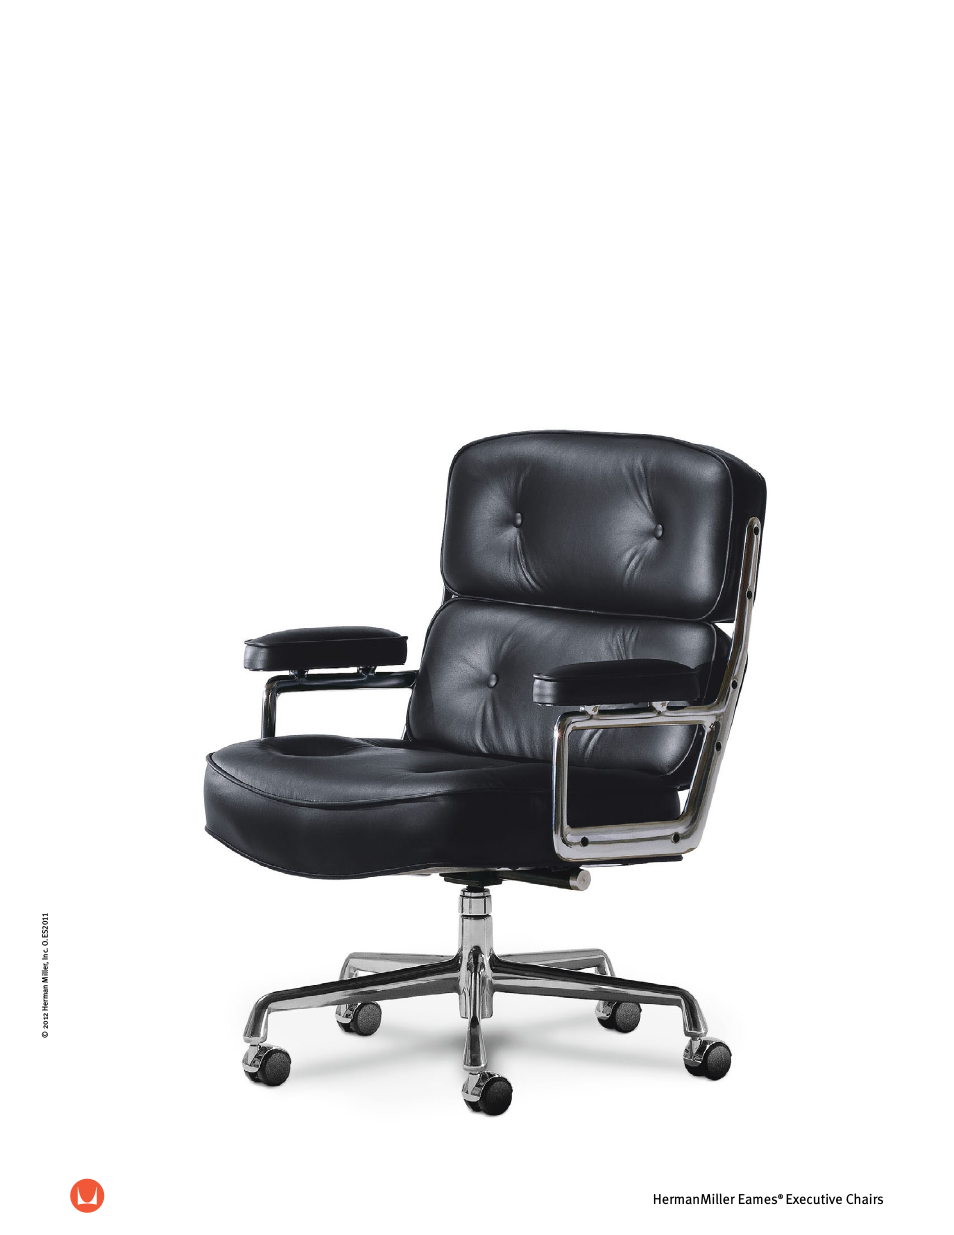 Eames Executive Chairs - Product sheet